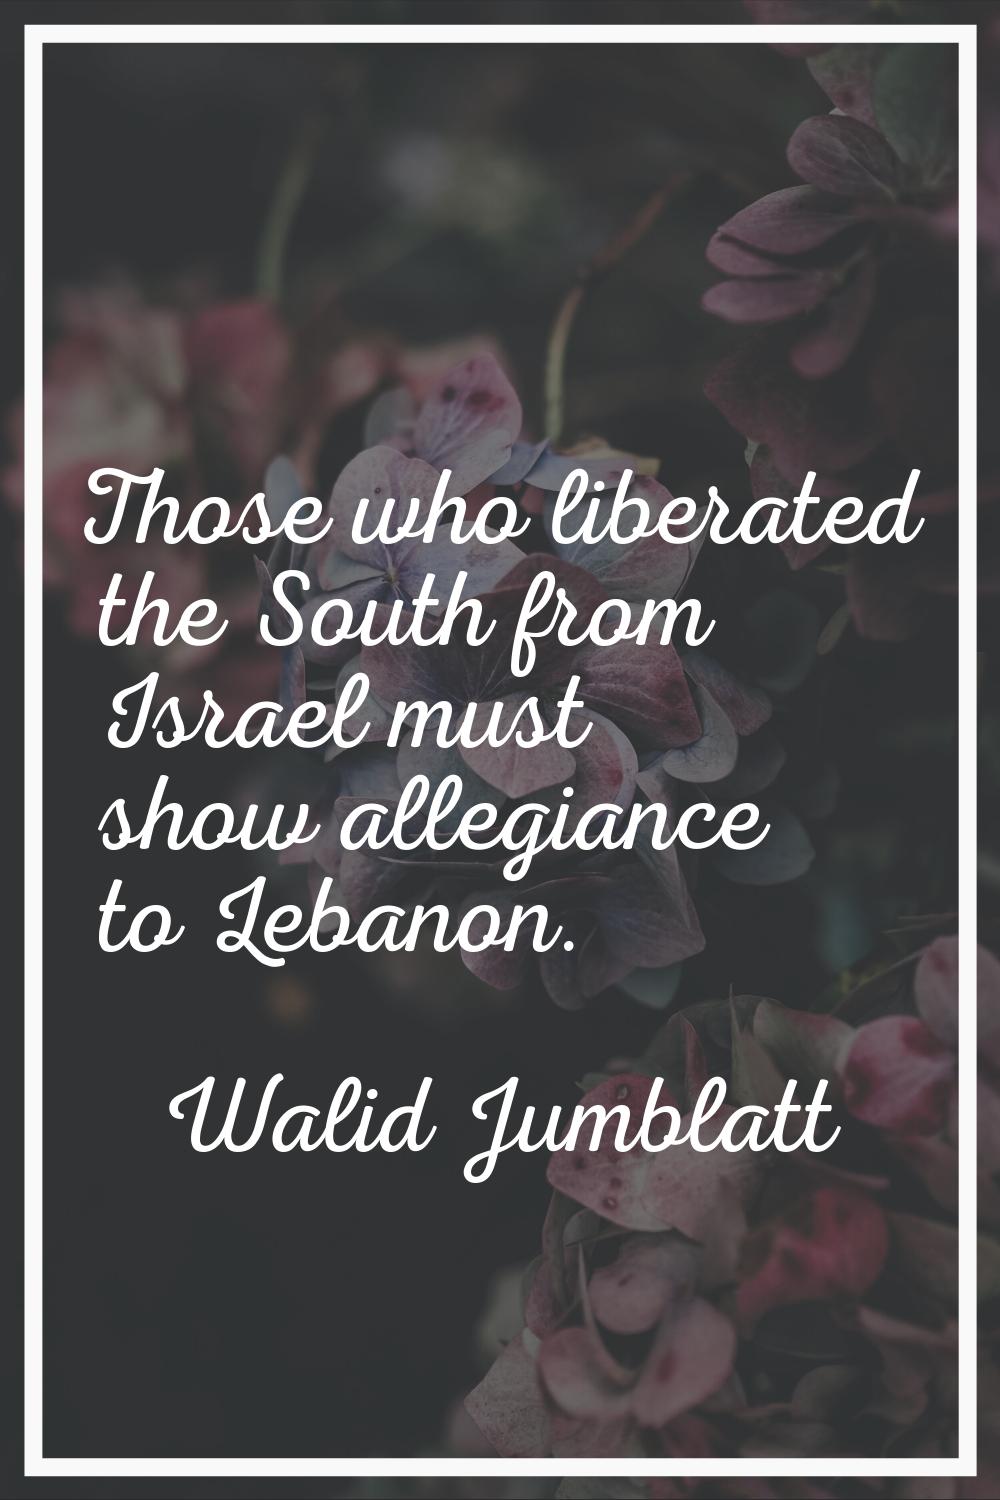 Those who liberated the South from Israel must show allegiance to Lebanon.